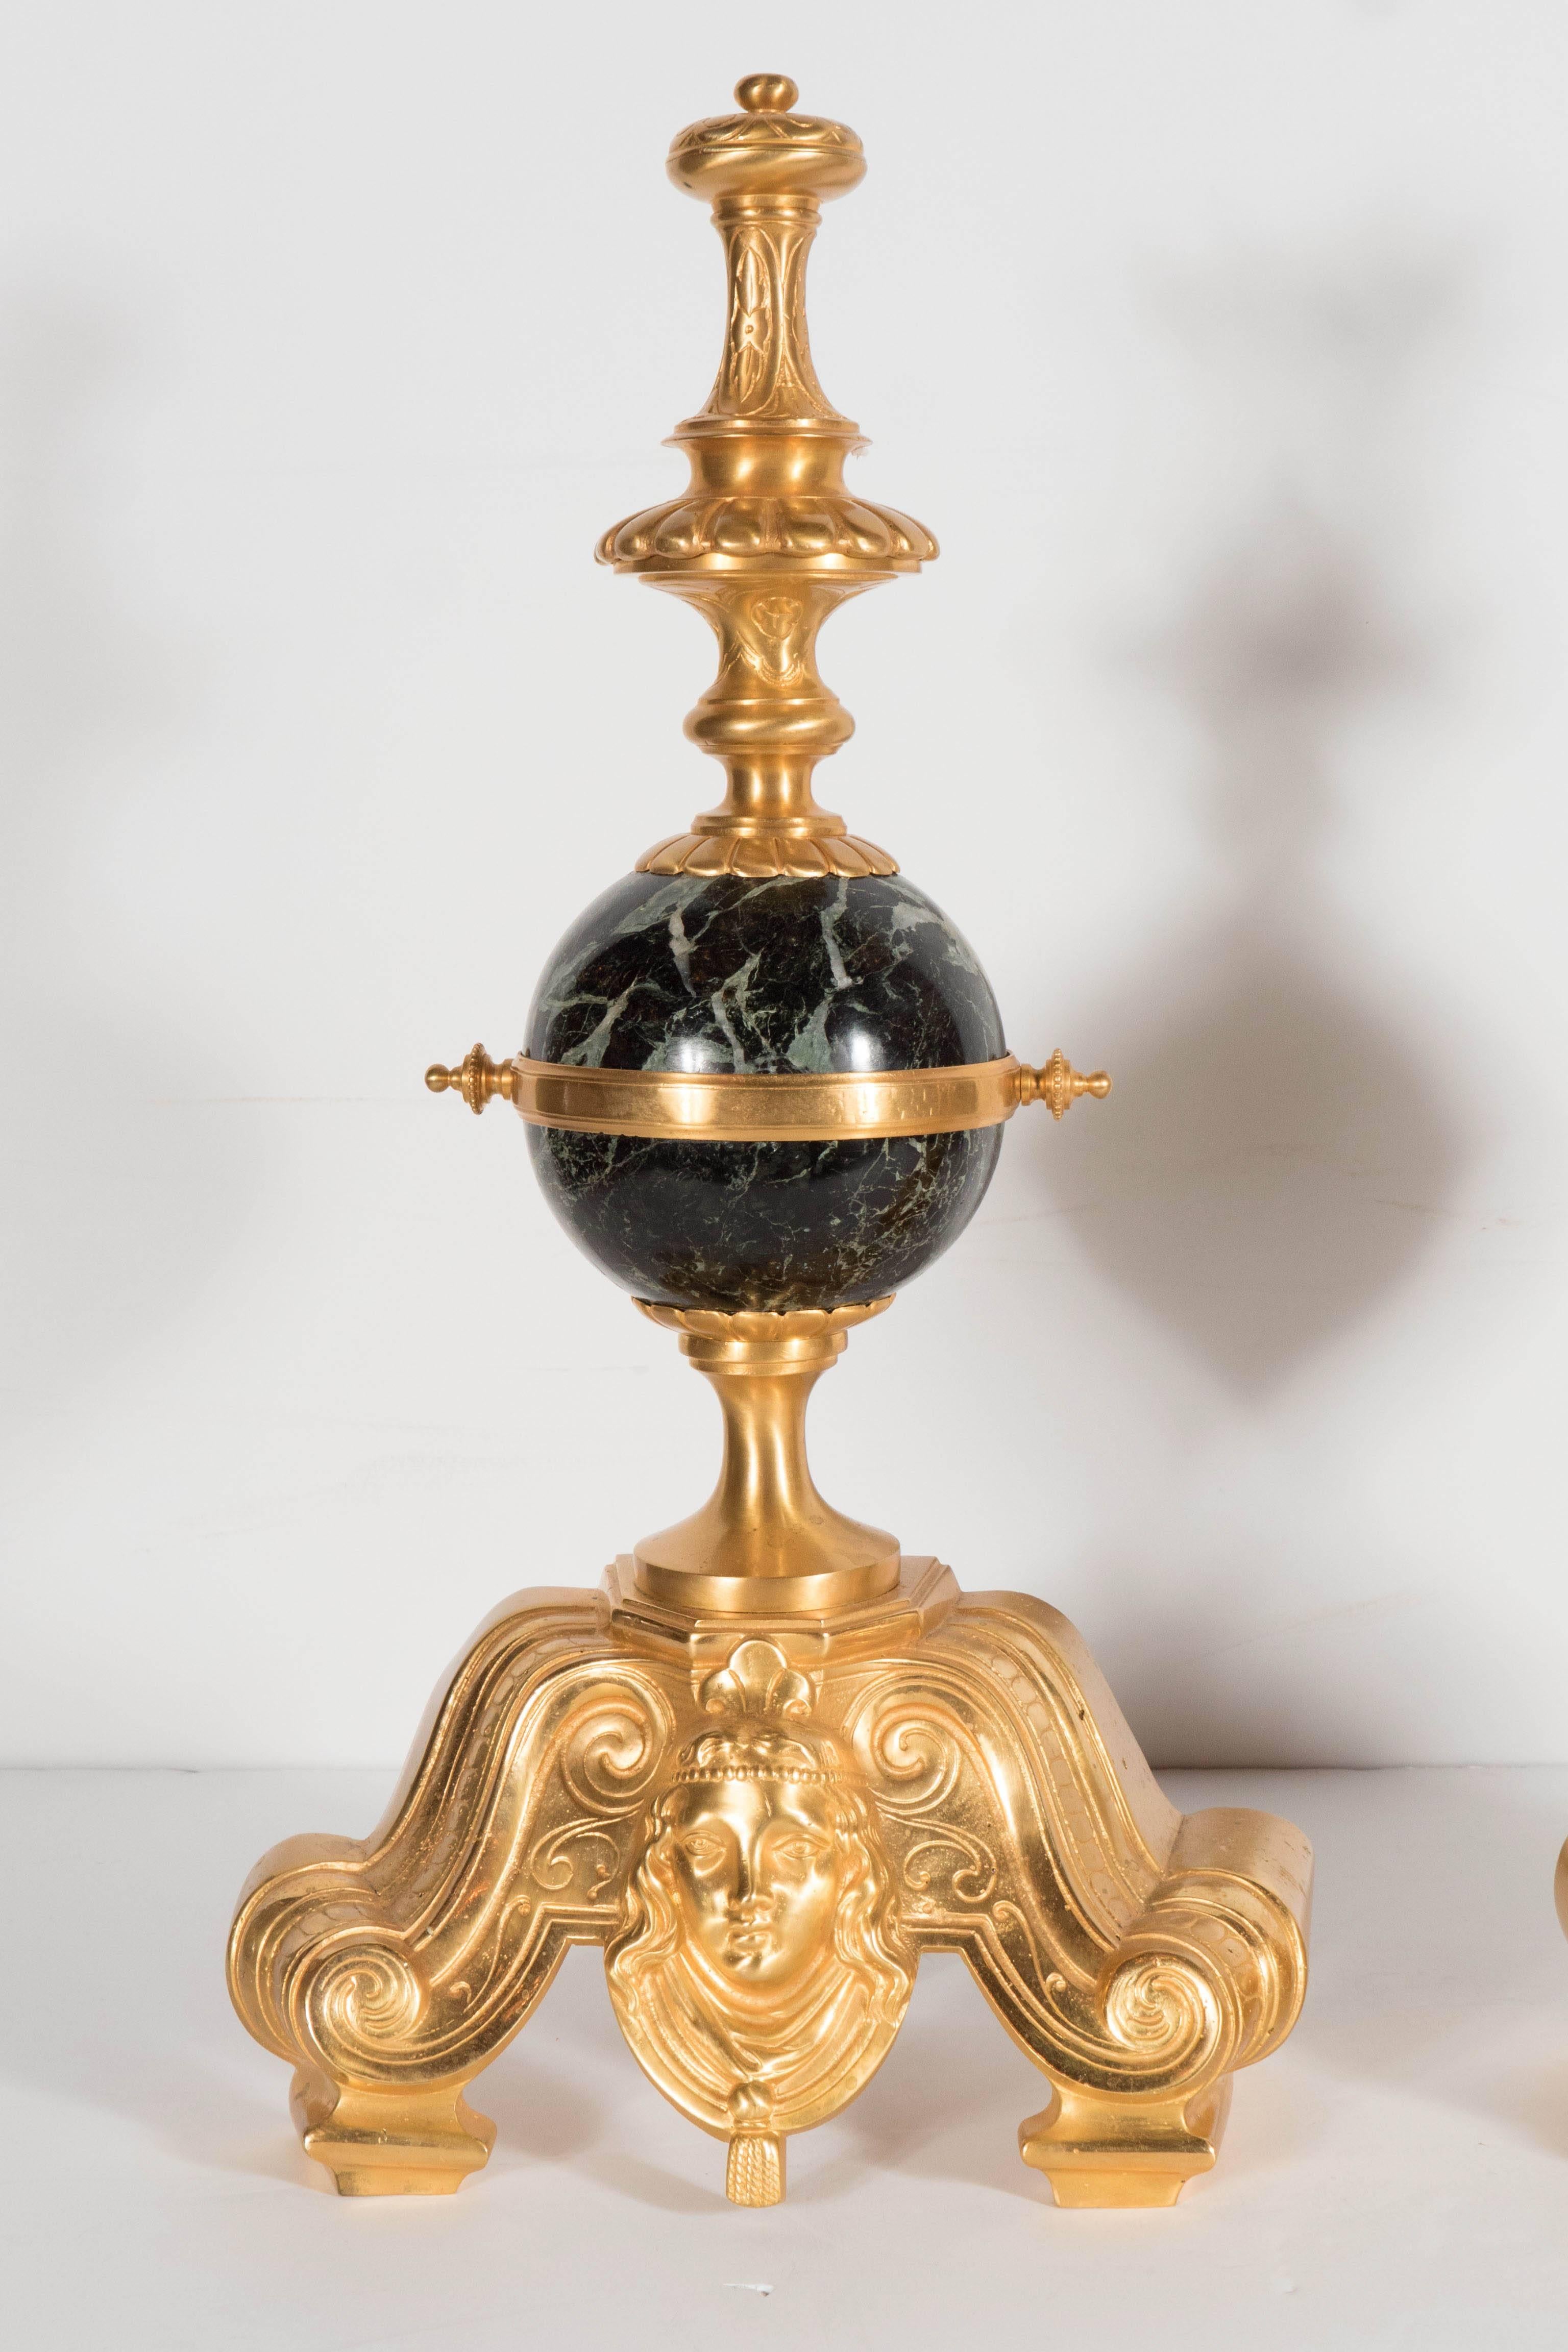 These stunning antique andirons chenets feature a Louis XV design in gilded bronze. A scroll form base with a bust adornment supporting a spherical exotic green marble detail with a stylized acanthus finial on top. These are in excellent